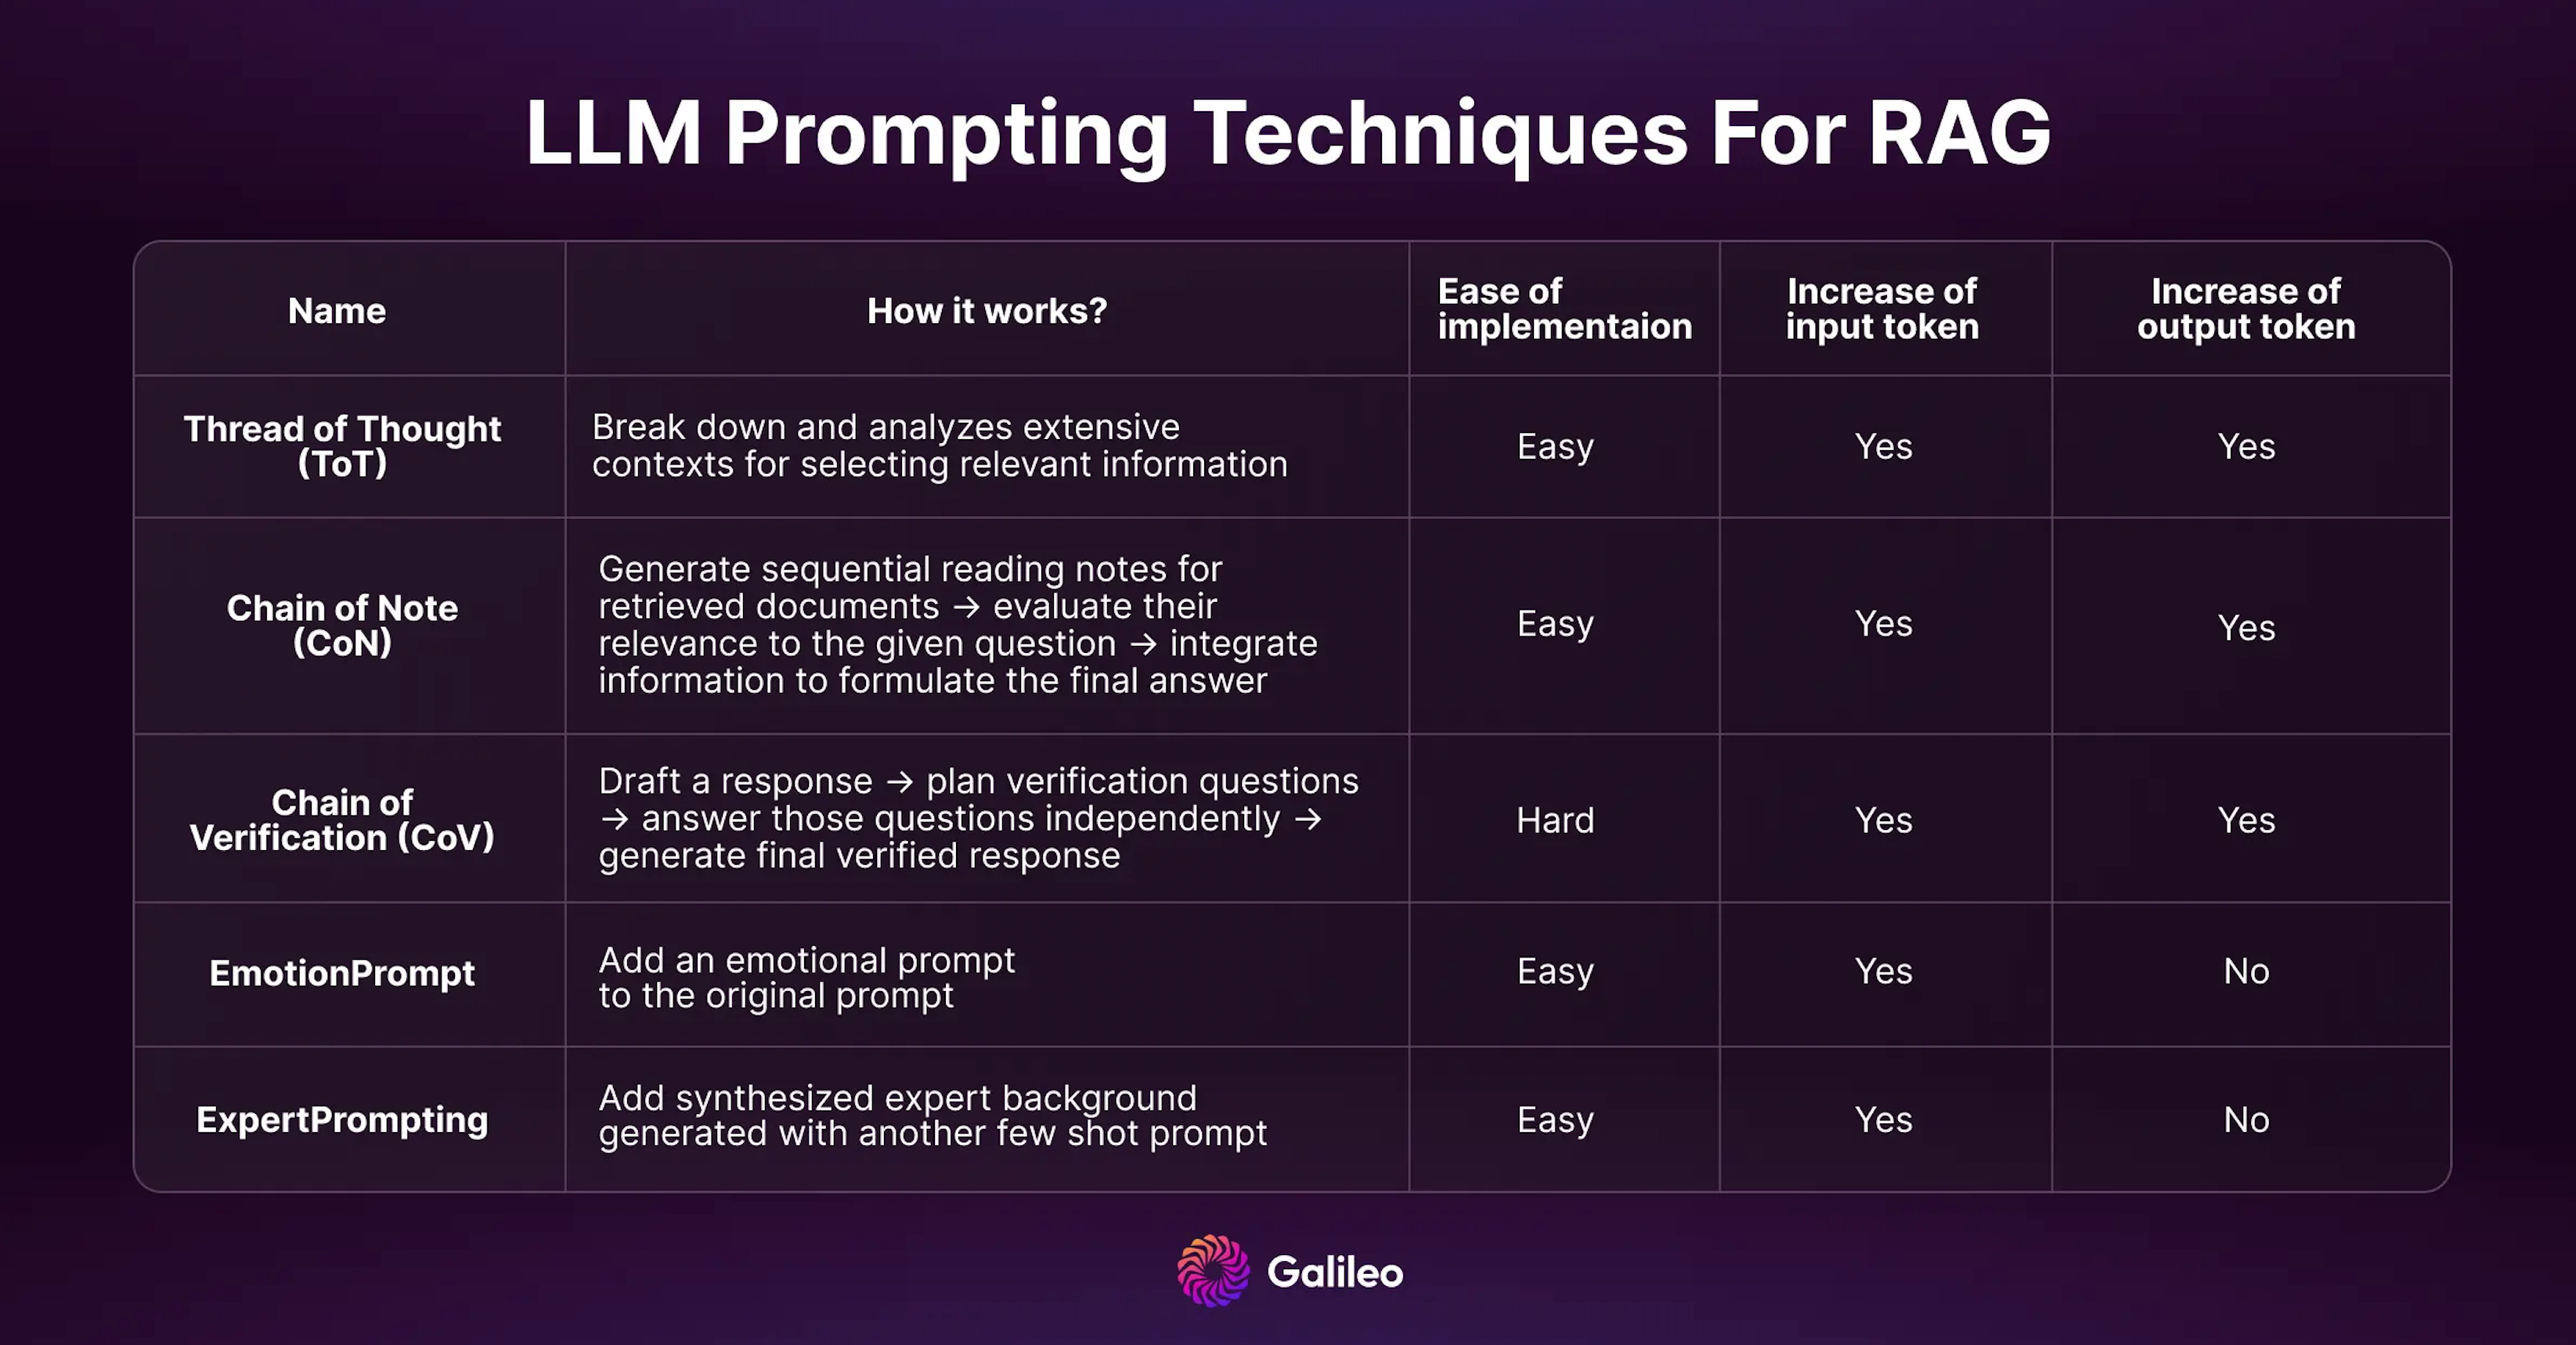 LLM prompting techniques for RAG